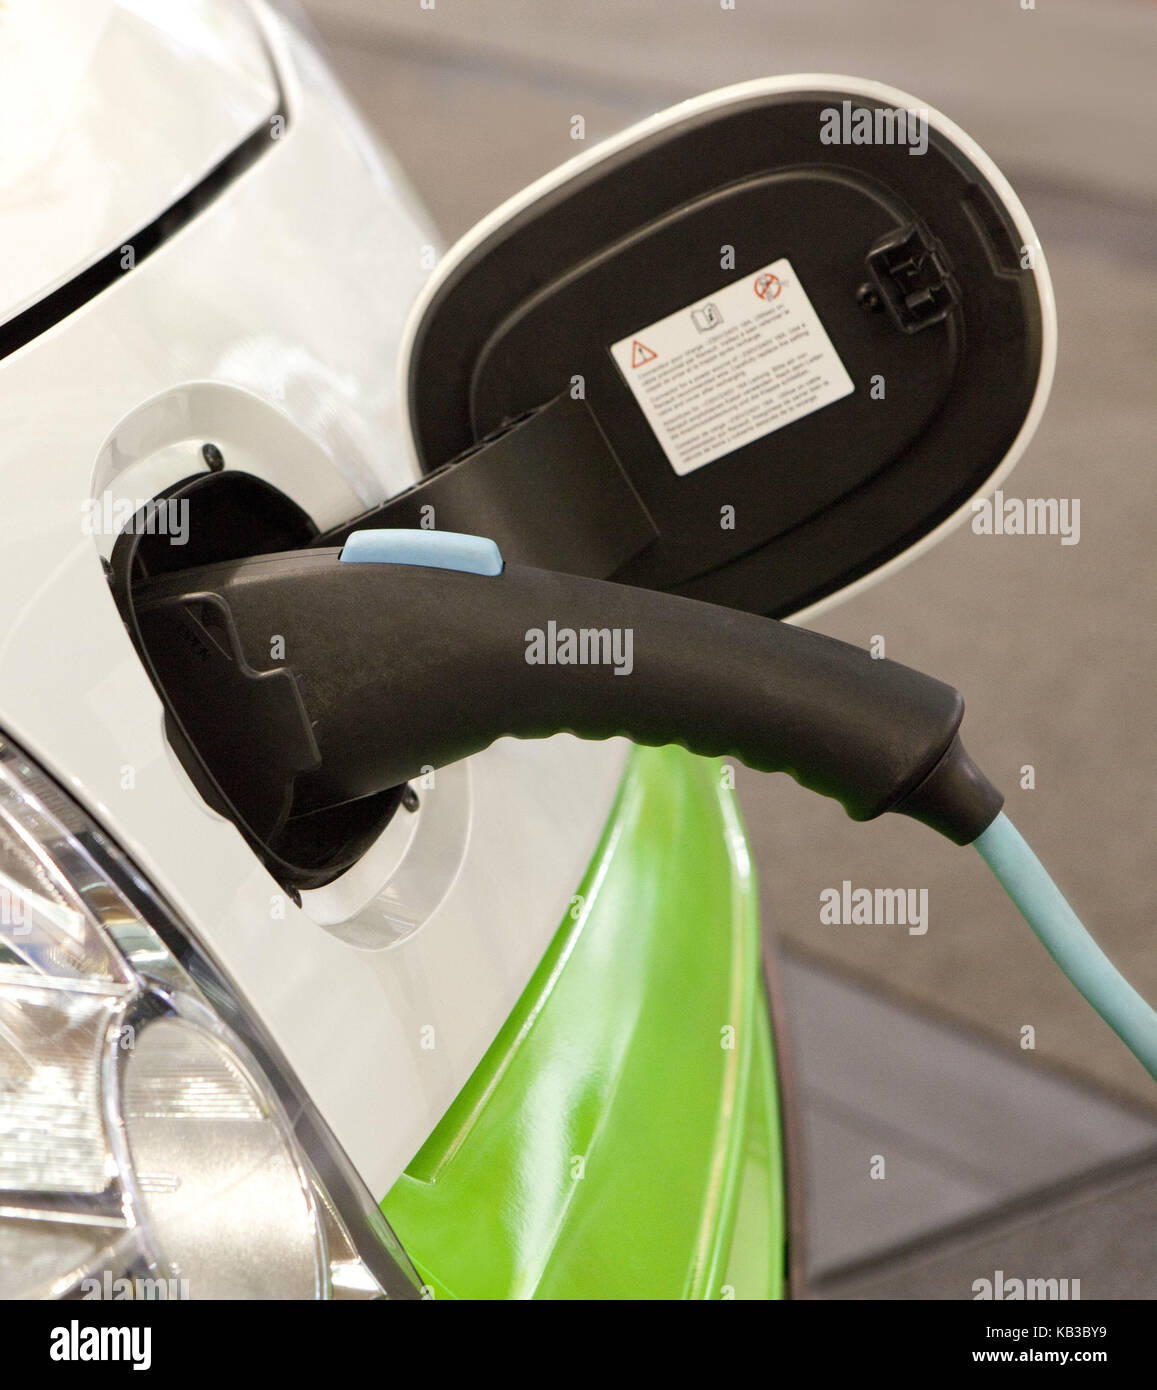 Electric car, charge, medium close-up, biotank, sprite, green, future, biology, icon, biodiesel, bioboom, biosprite, biotank, current, electronically, elektro, electromobile, car, vehicle, ecologically, green future, green energy, Zukufnt, cleanly, clean, load, environmentally friendly, refuel, energy, E car, Co2 Auststoß, environmental balance, car, demand, passenger car, autospring, anew, new, trendy, trend, Nullemmision, issue, current demand, current eater, power consumption, immensely, shocking, high, tank filling, Stock Photo